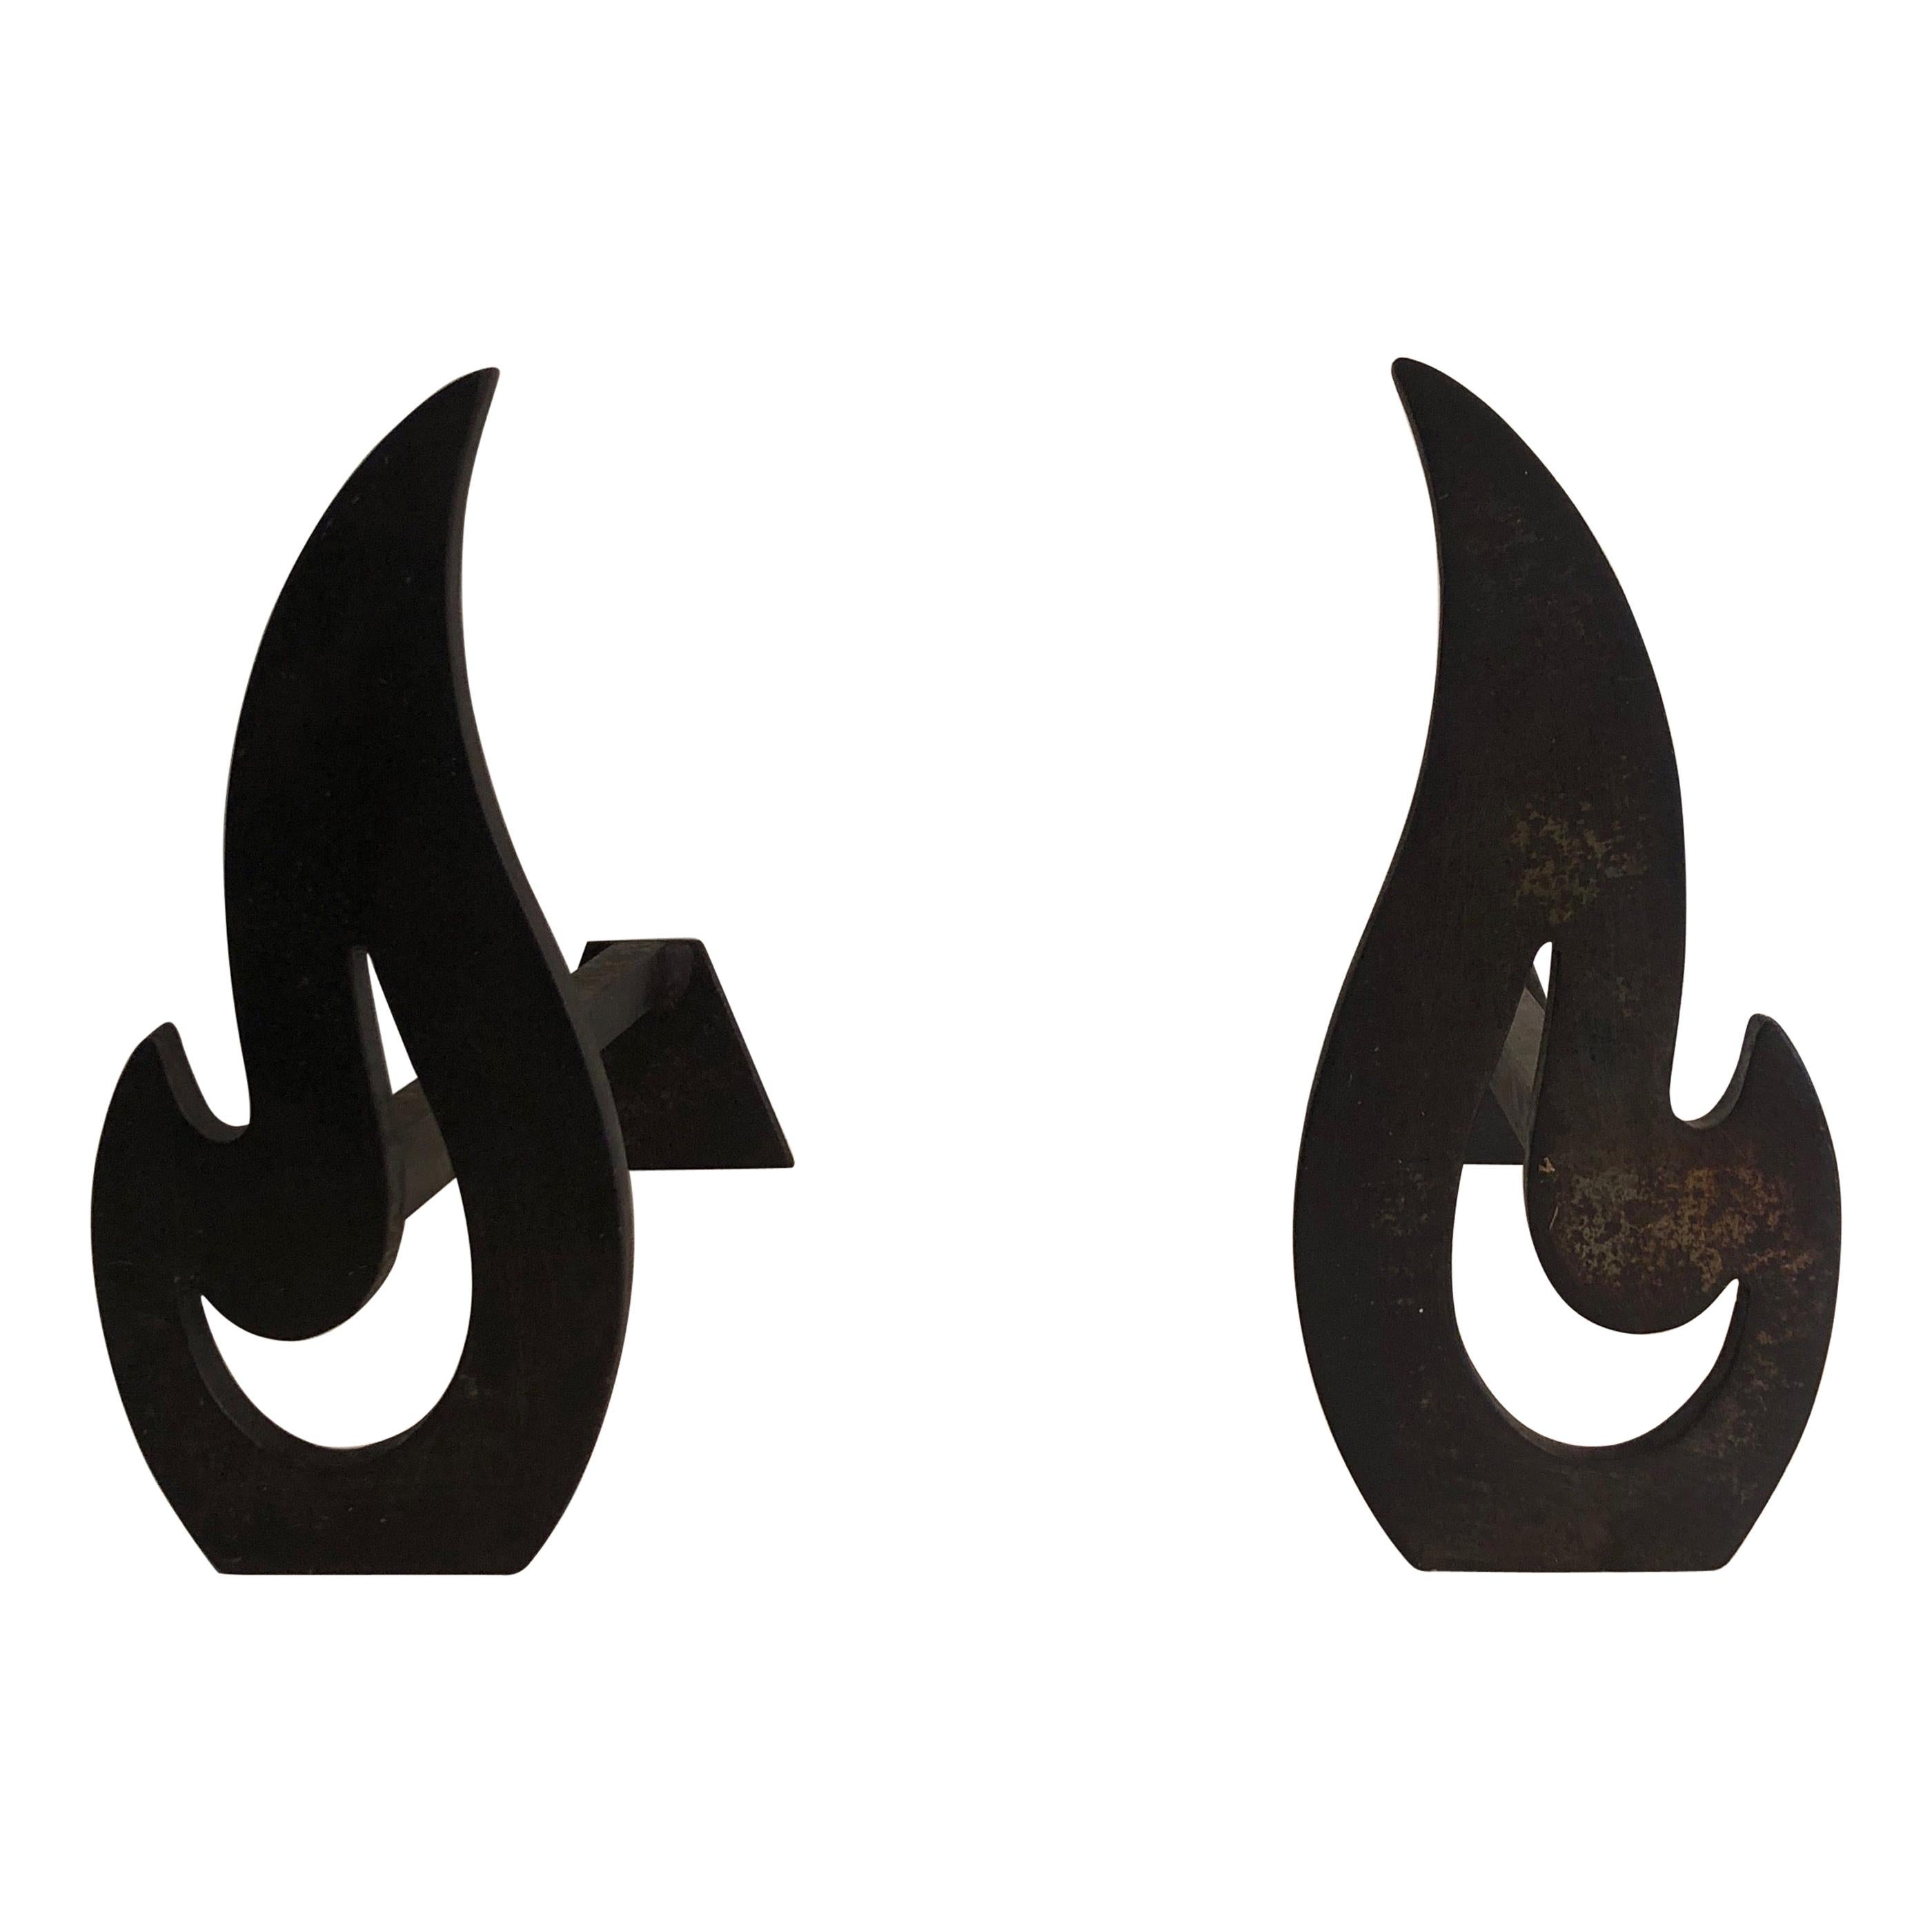 Pair of Modernist Steel and Wrought Iron Flame Andirons, French, Circa 1970